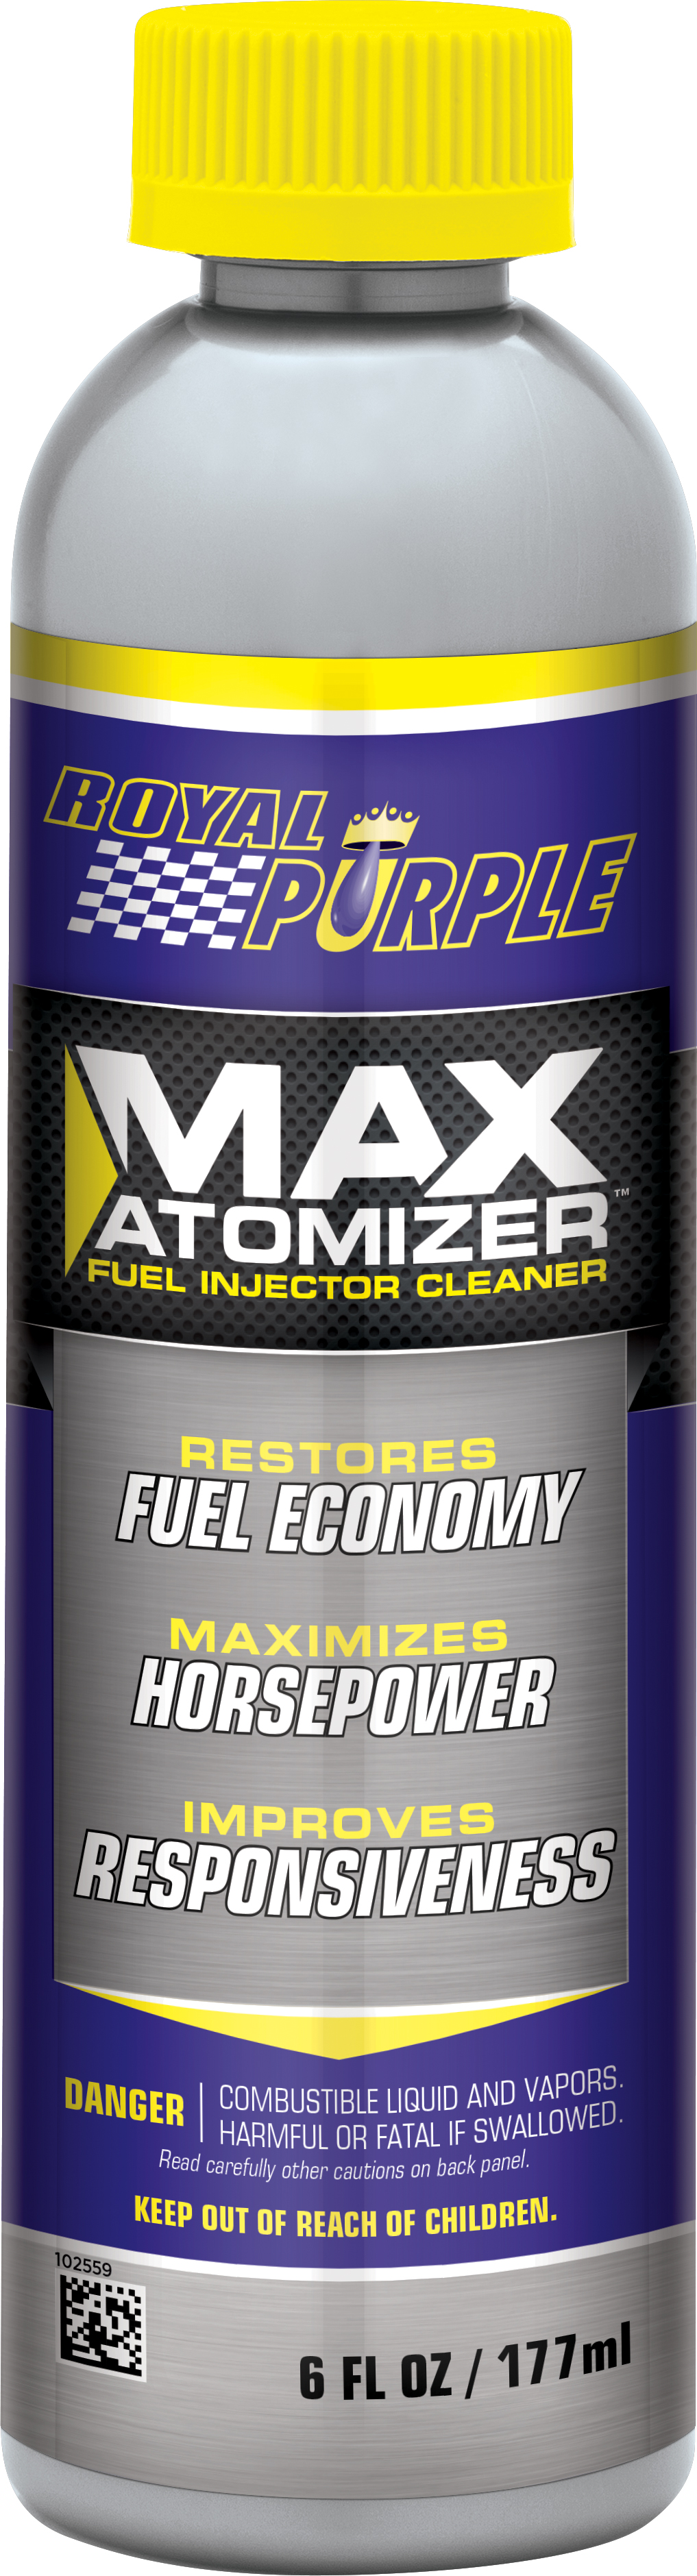 Royal Purple Max Atomizer Fuel Injector Cleaner